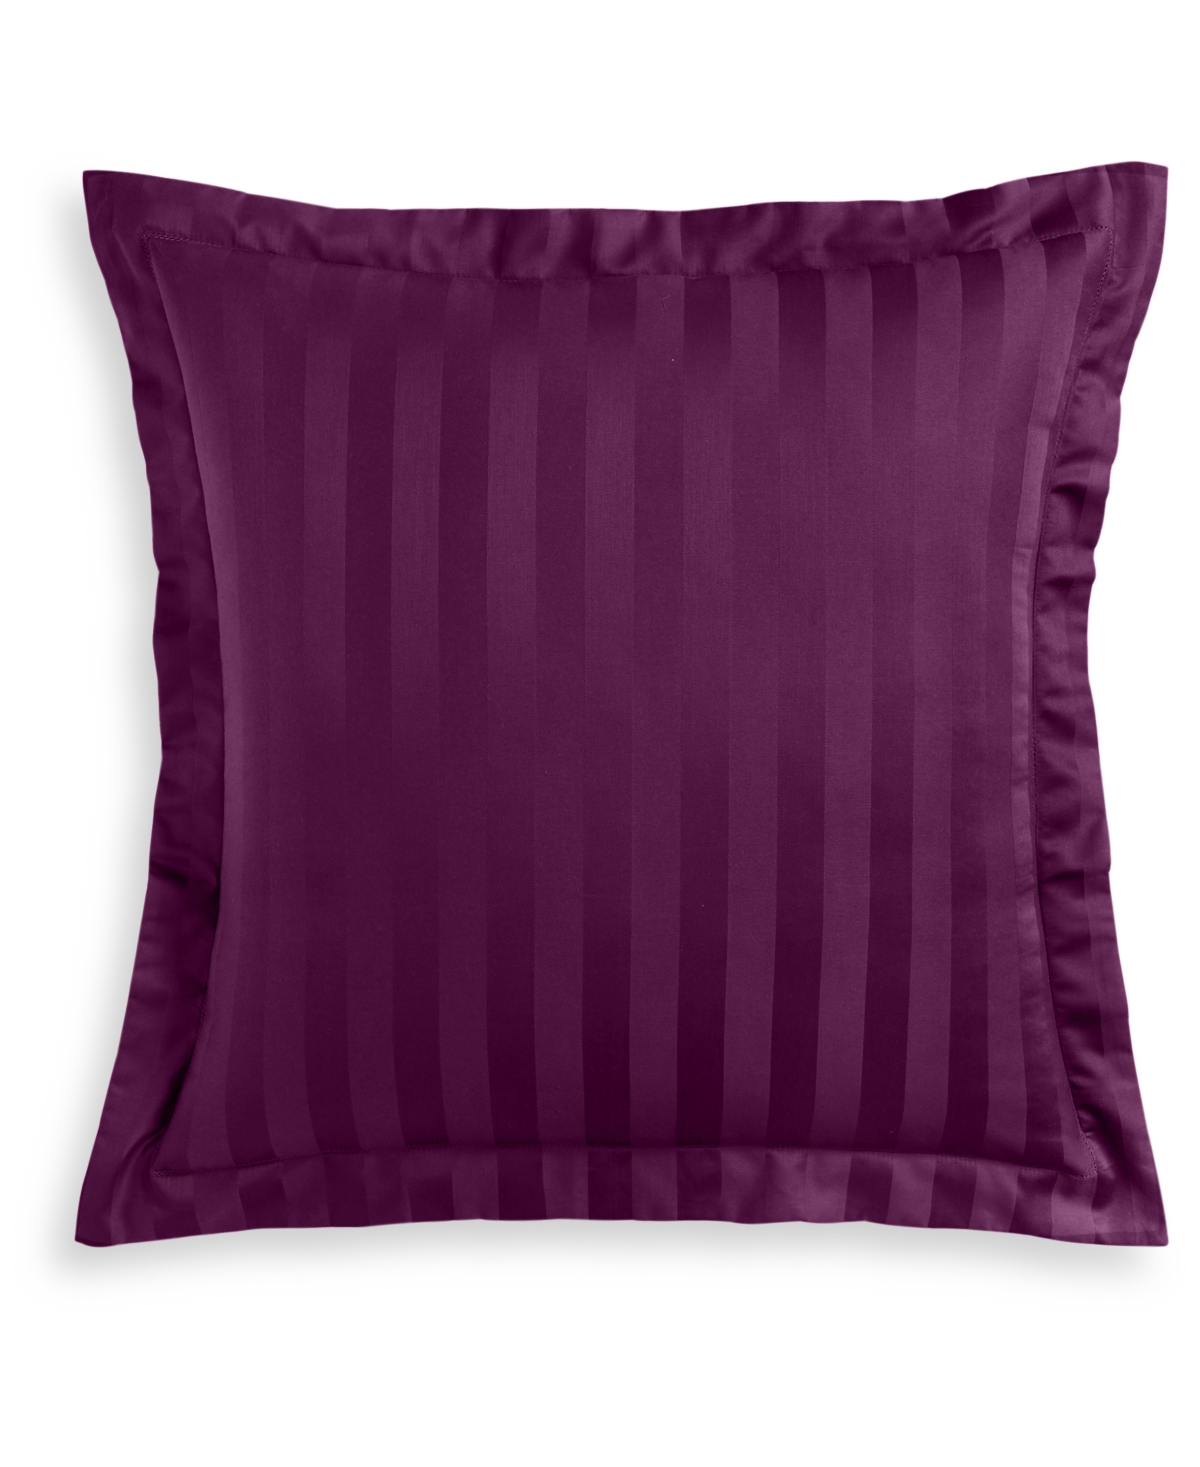 Damask 1.5" Stripe 550 Thread Count 100% Cotton Sham, European, Created for Macy's - Mulberry